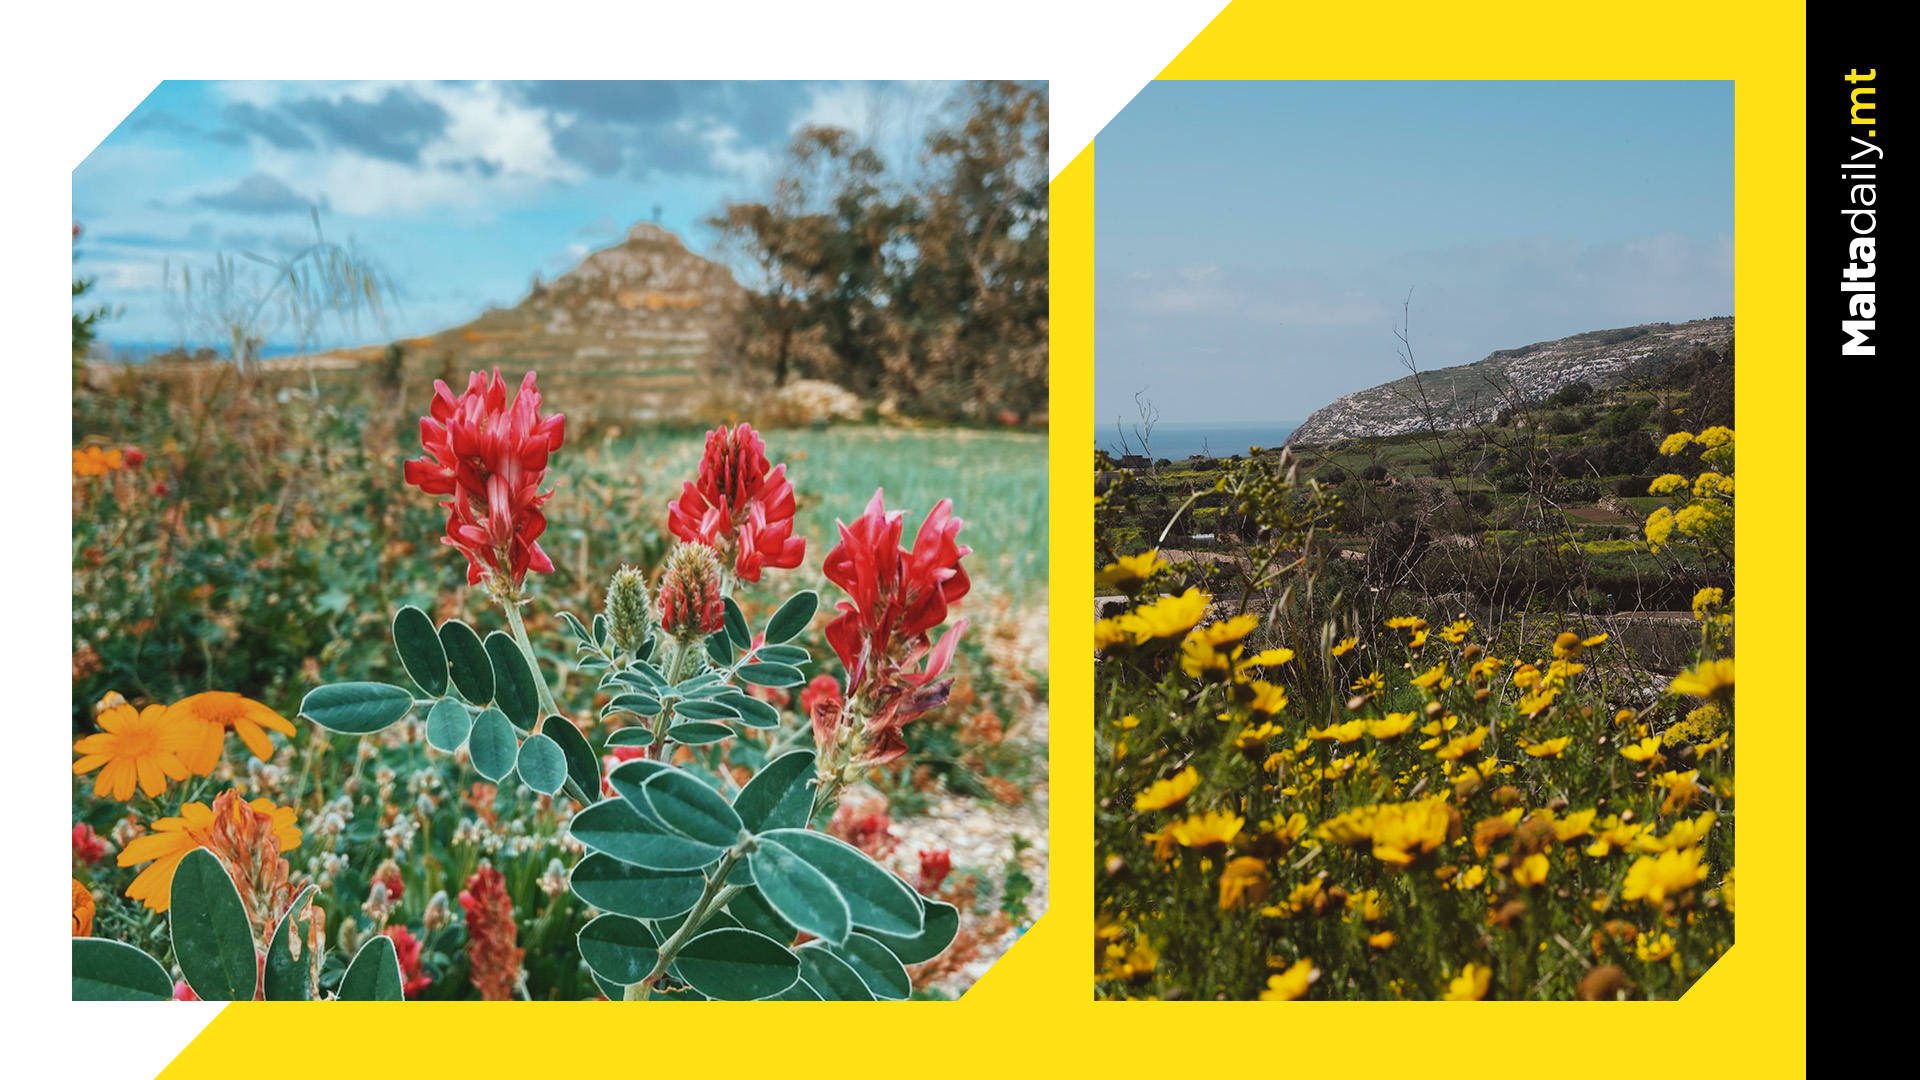 The Gozo Flower Festival is finally here and here's what you should expect